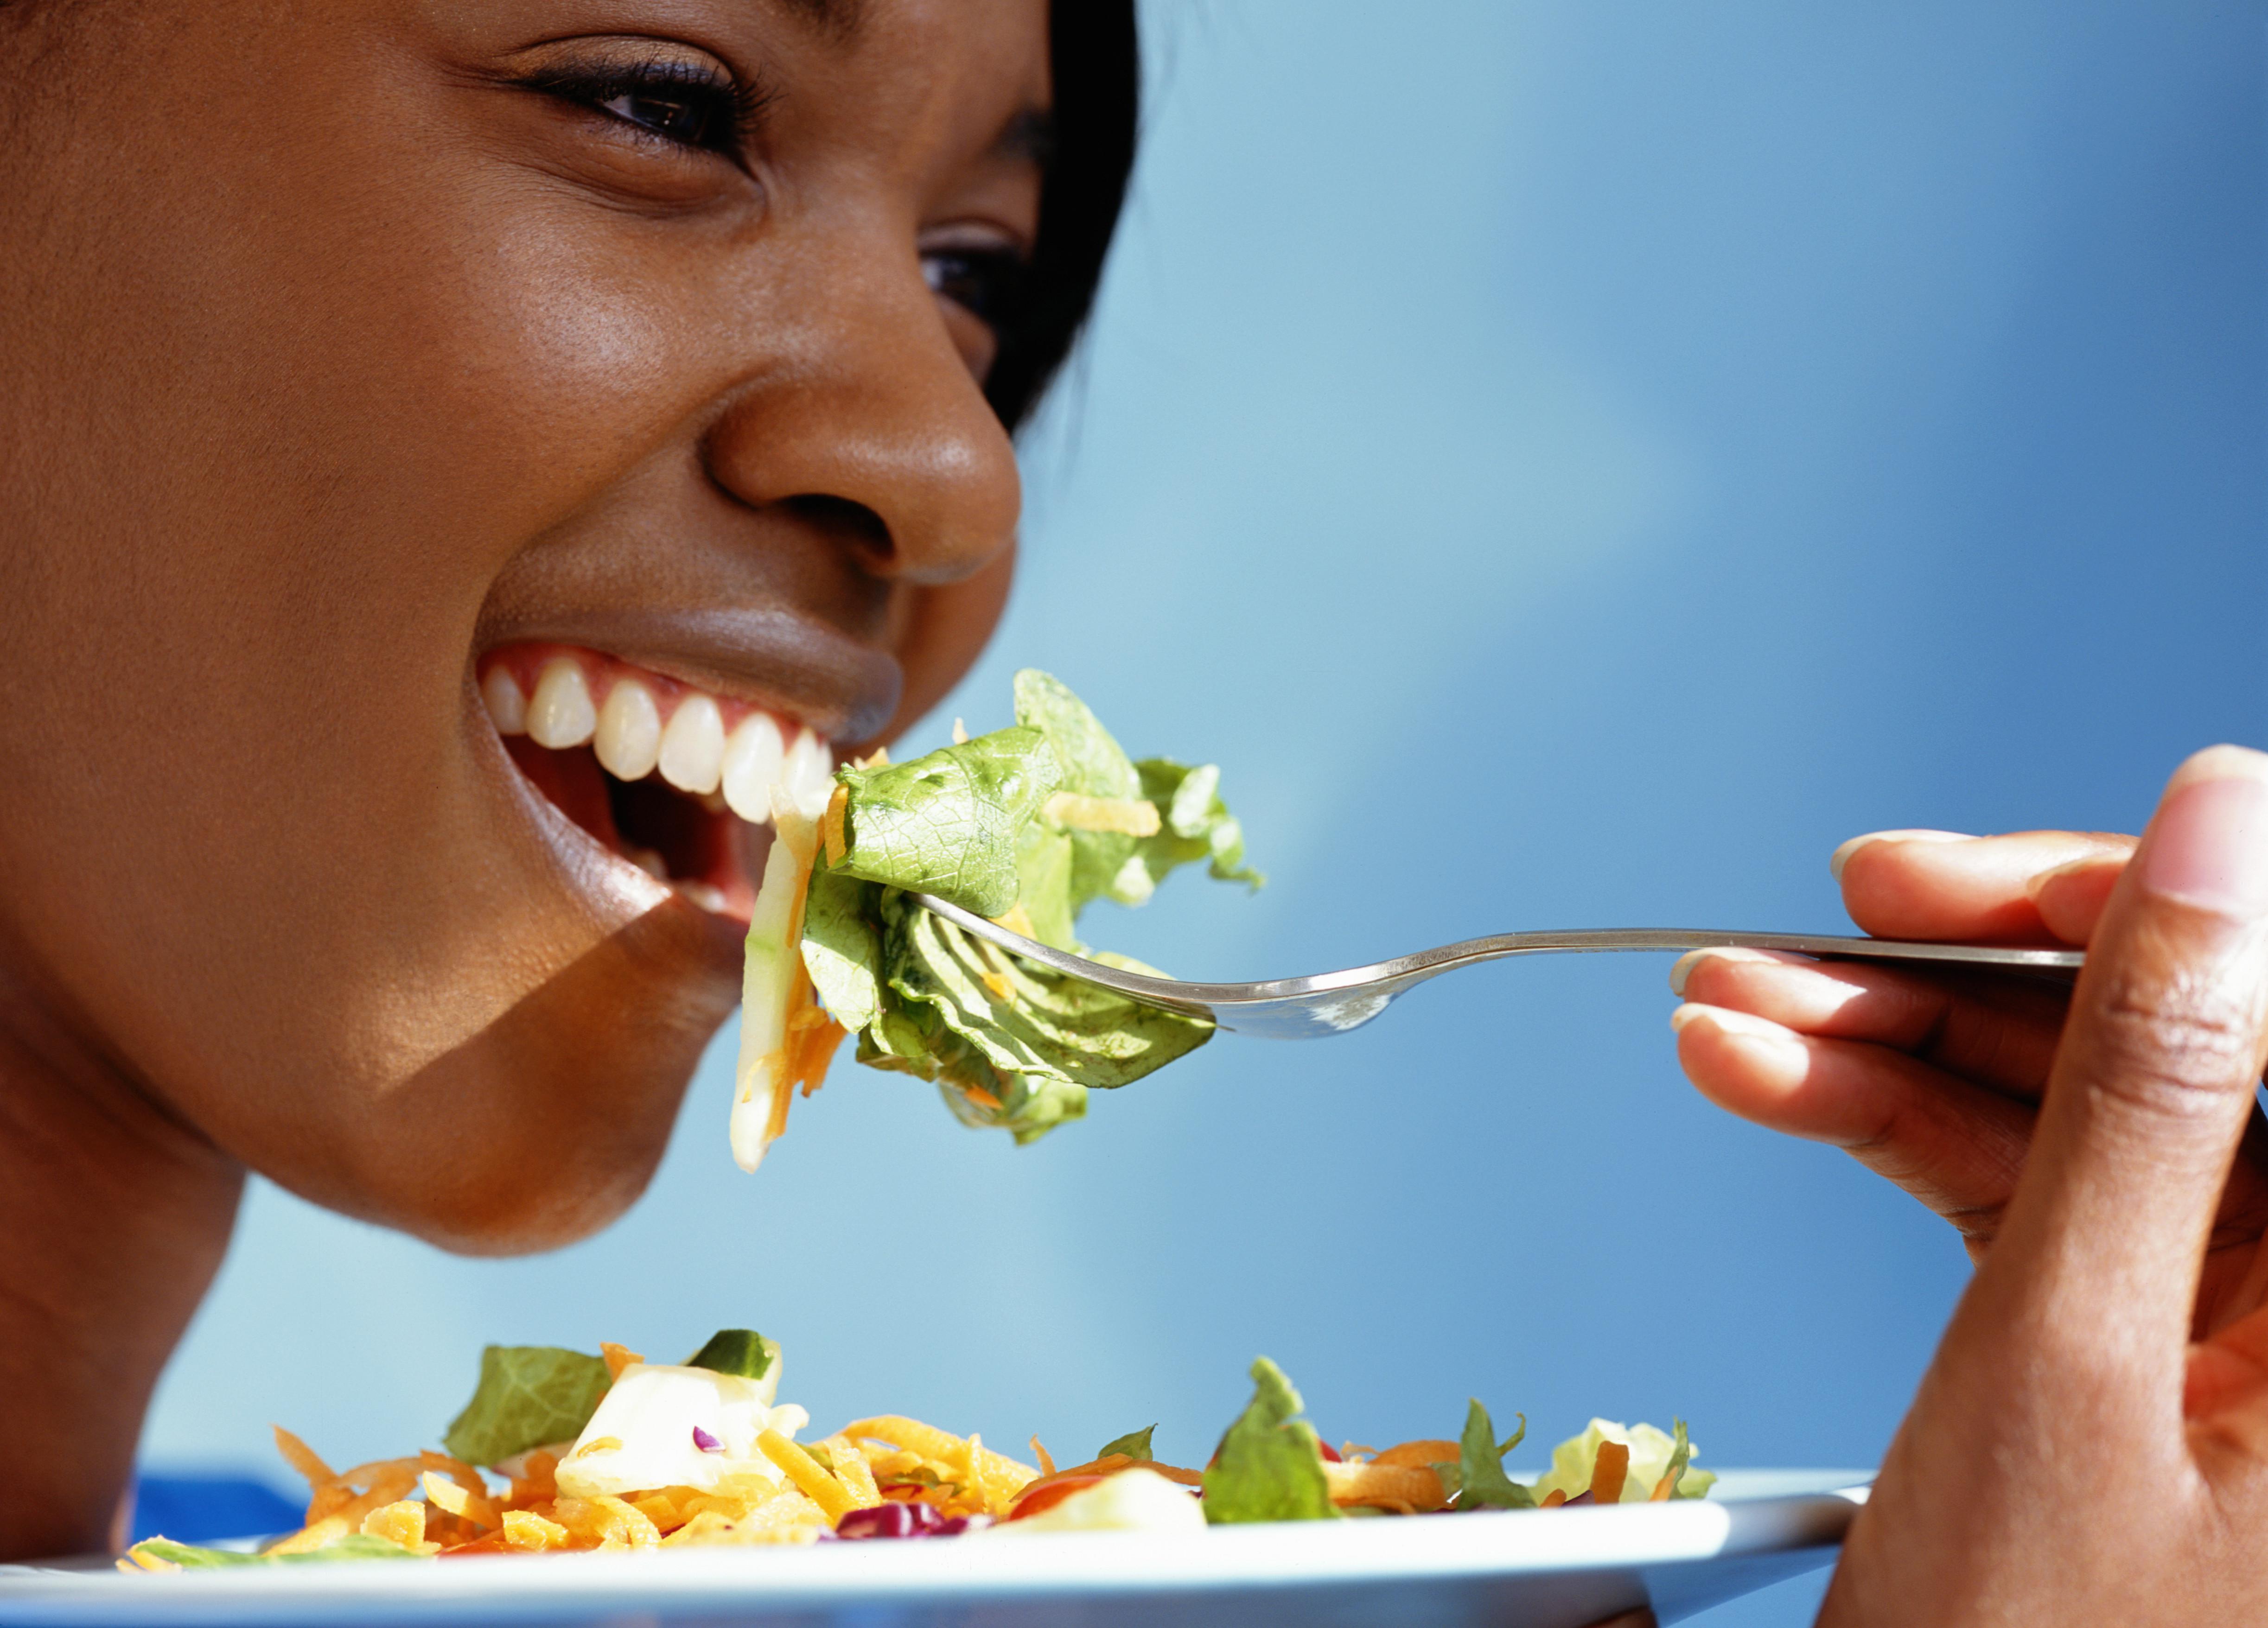 Young woman eating salad, close-up, side view